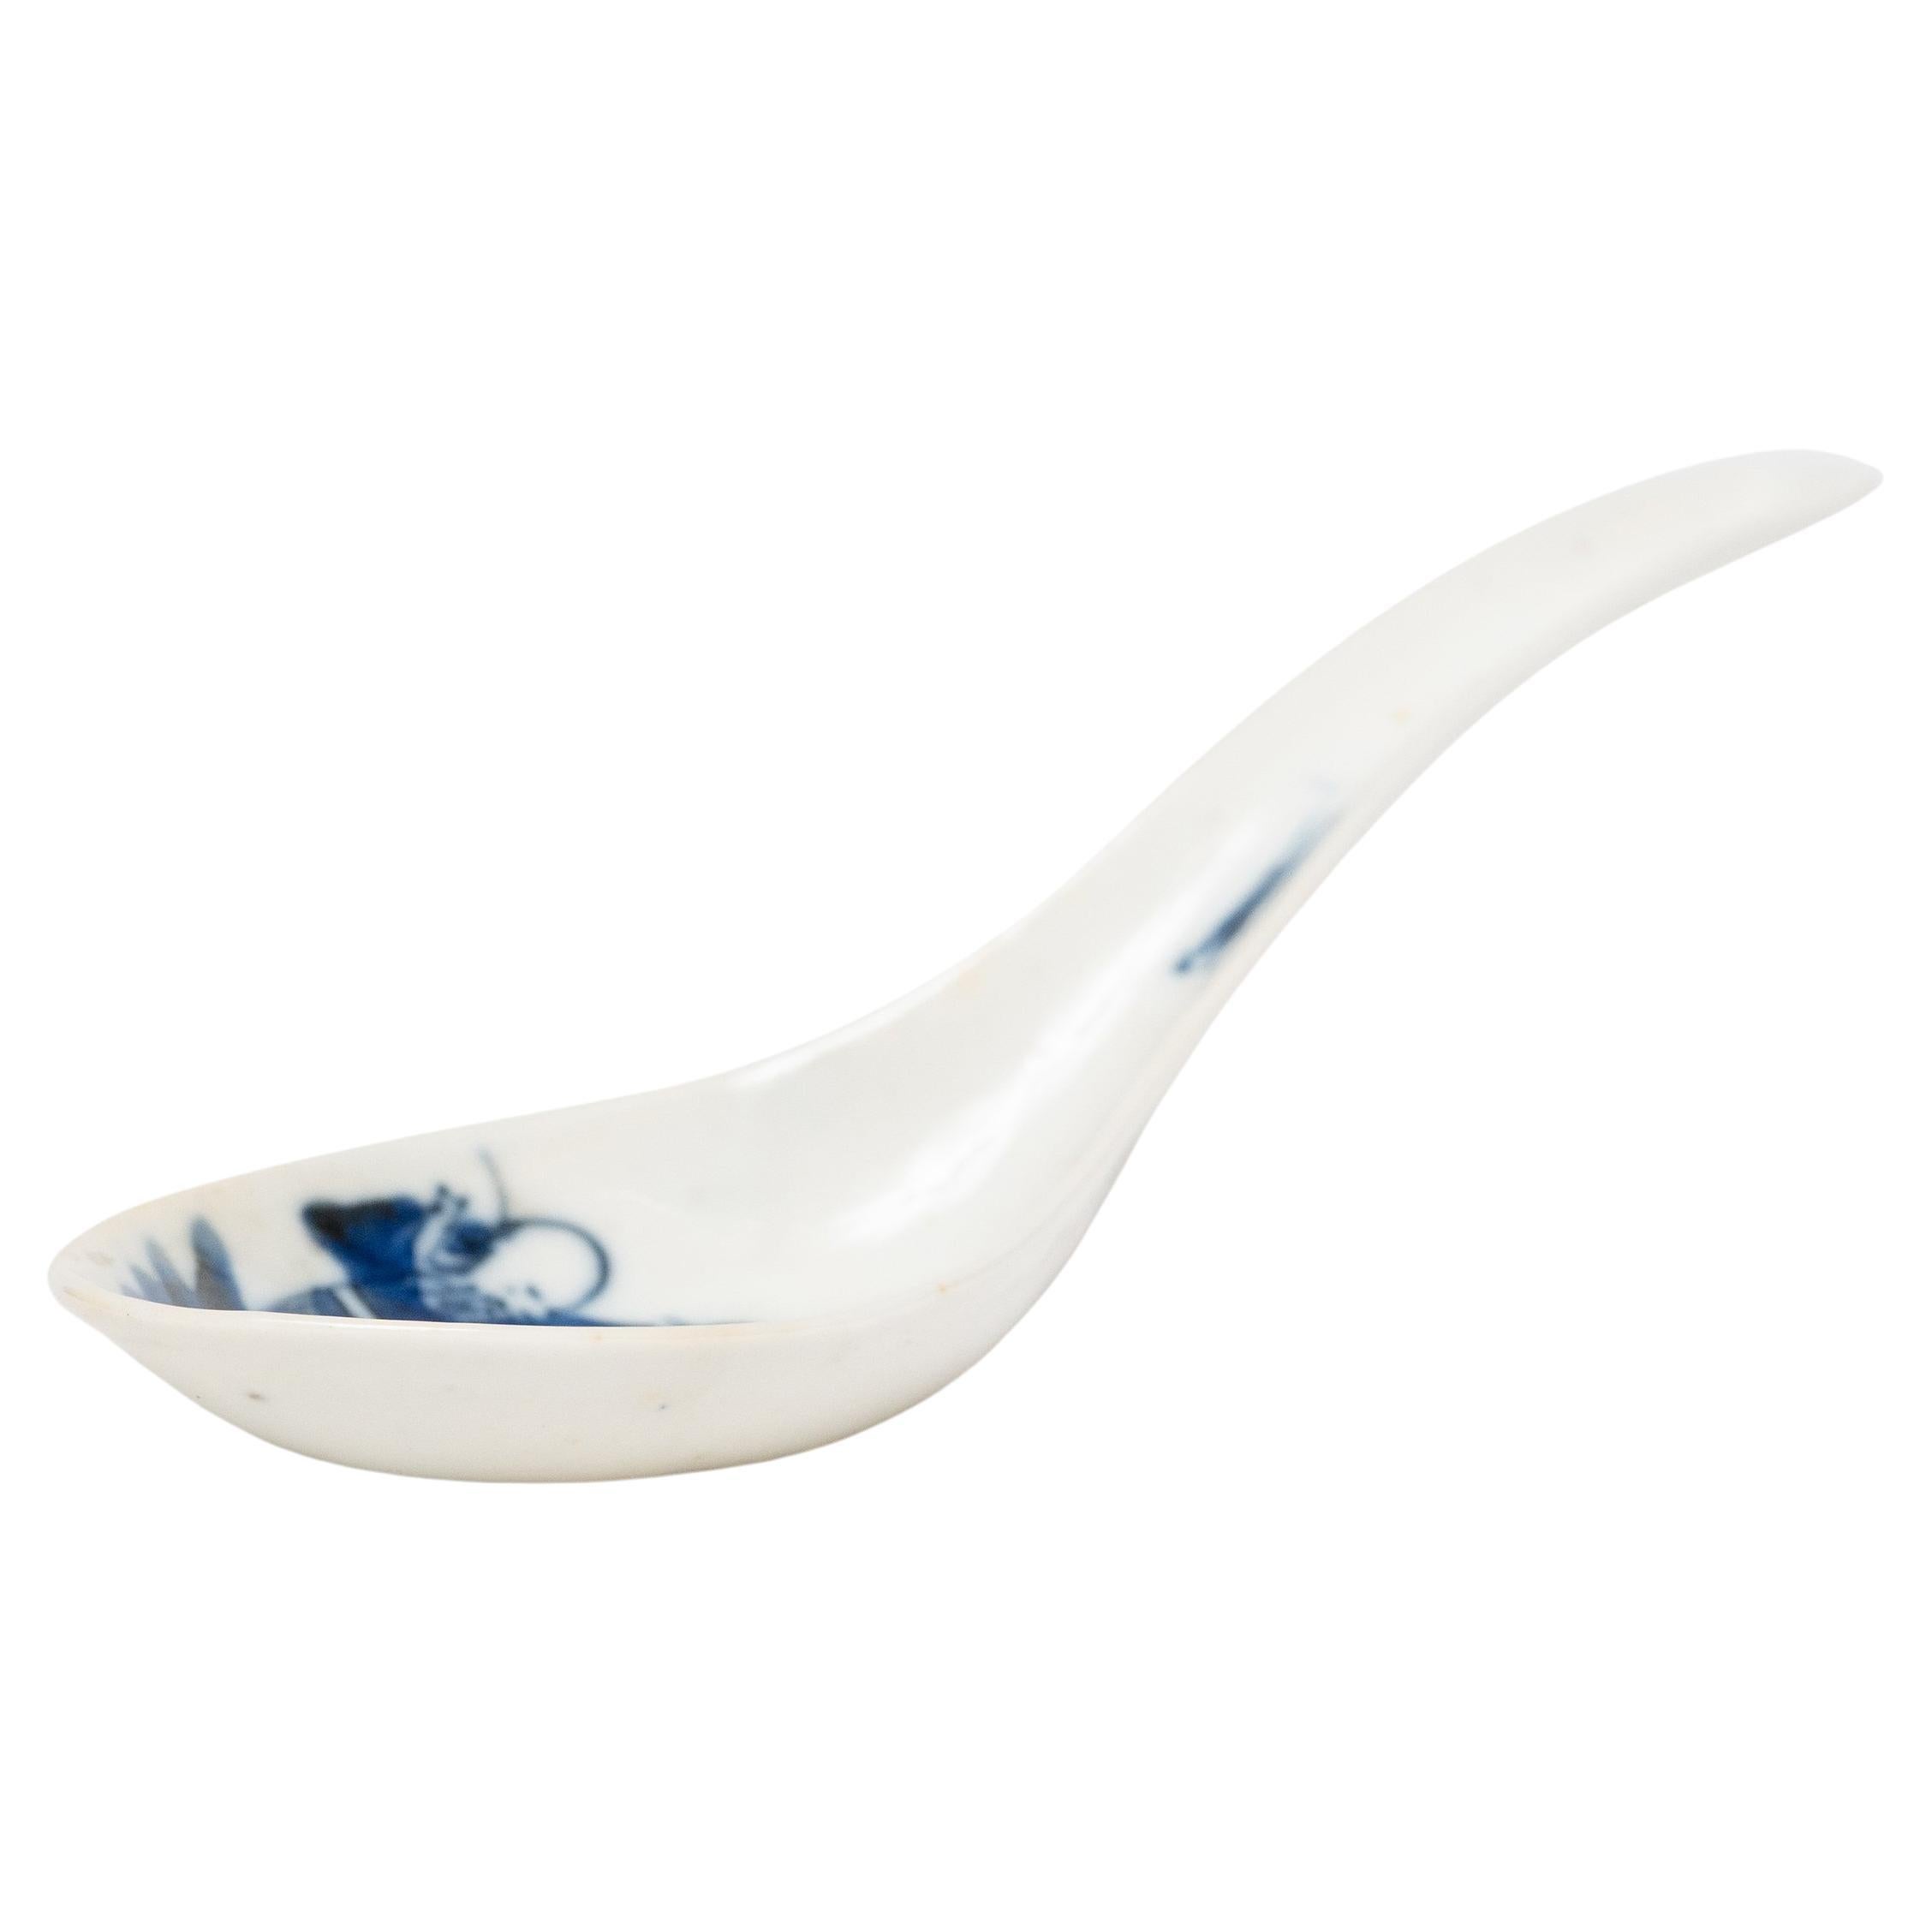 Chinese Blue and White Porcelain Spoon, c. 1900